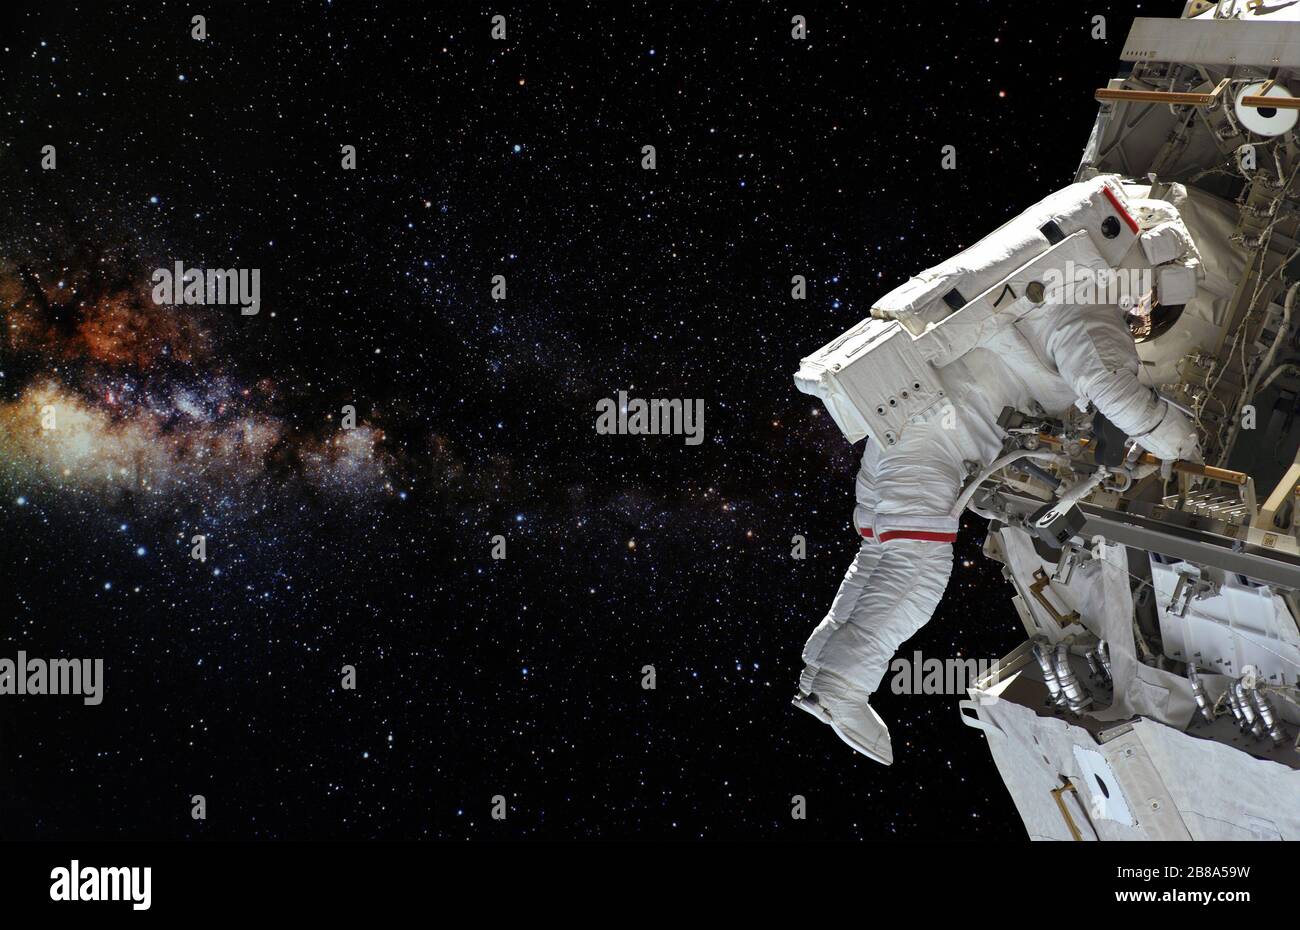 Astronaut on space mission with earth on the background. Elements of this image furnished by NASA. Stock Photo